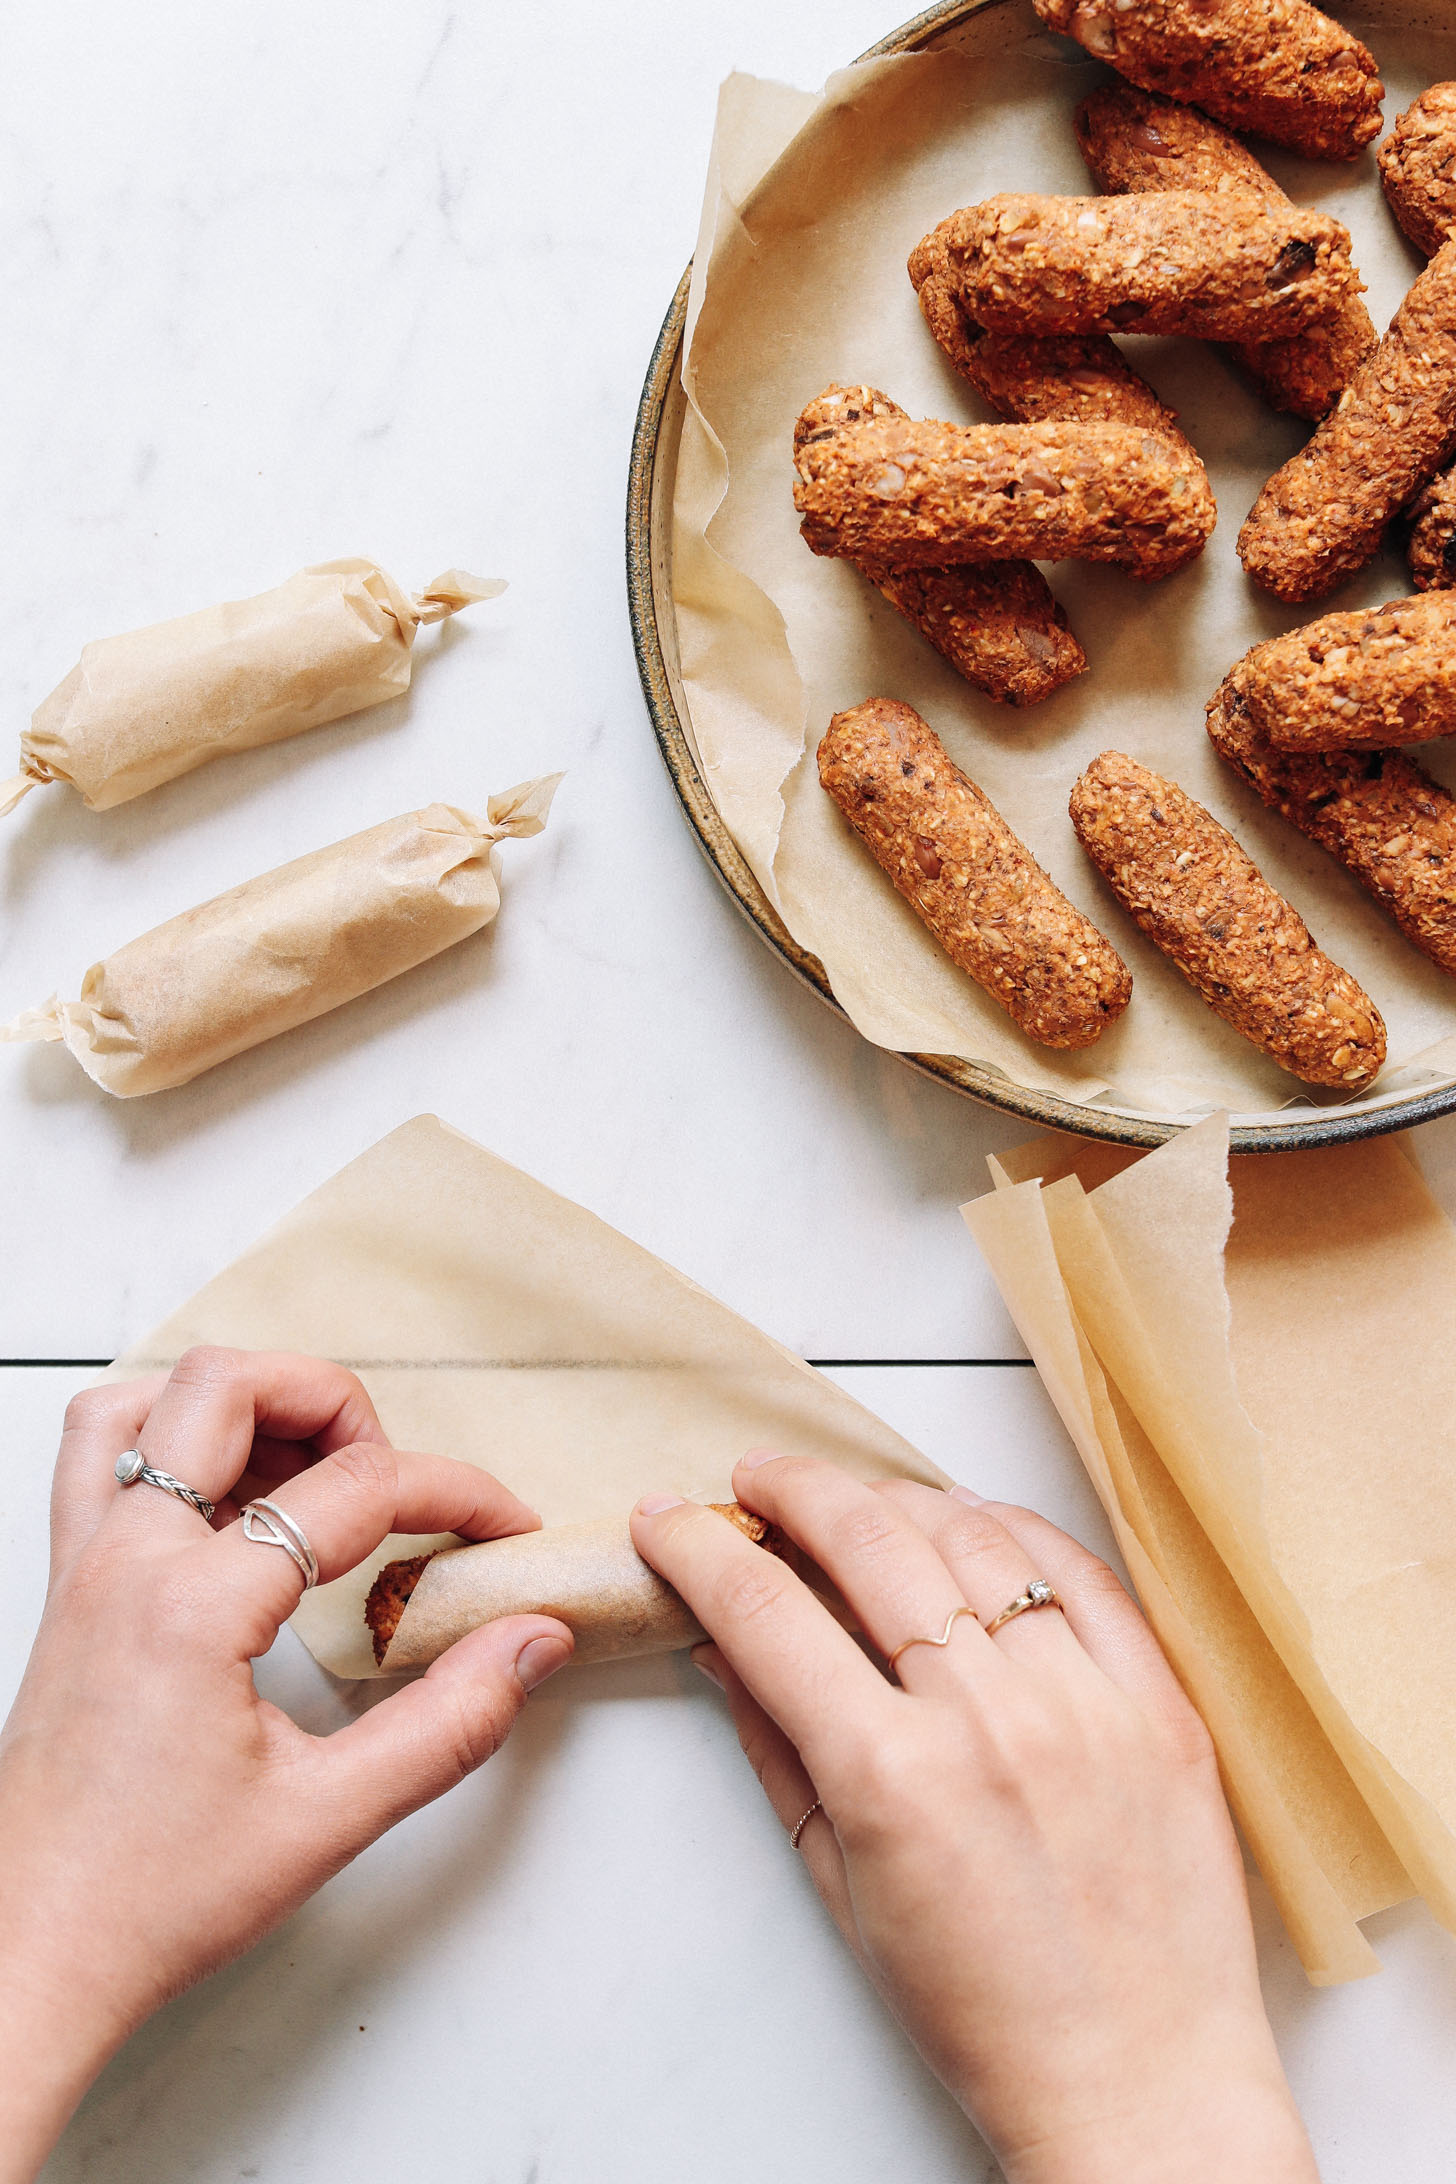 Rolling a vegan sausage link in parchment paper